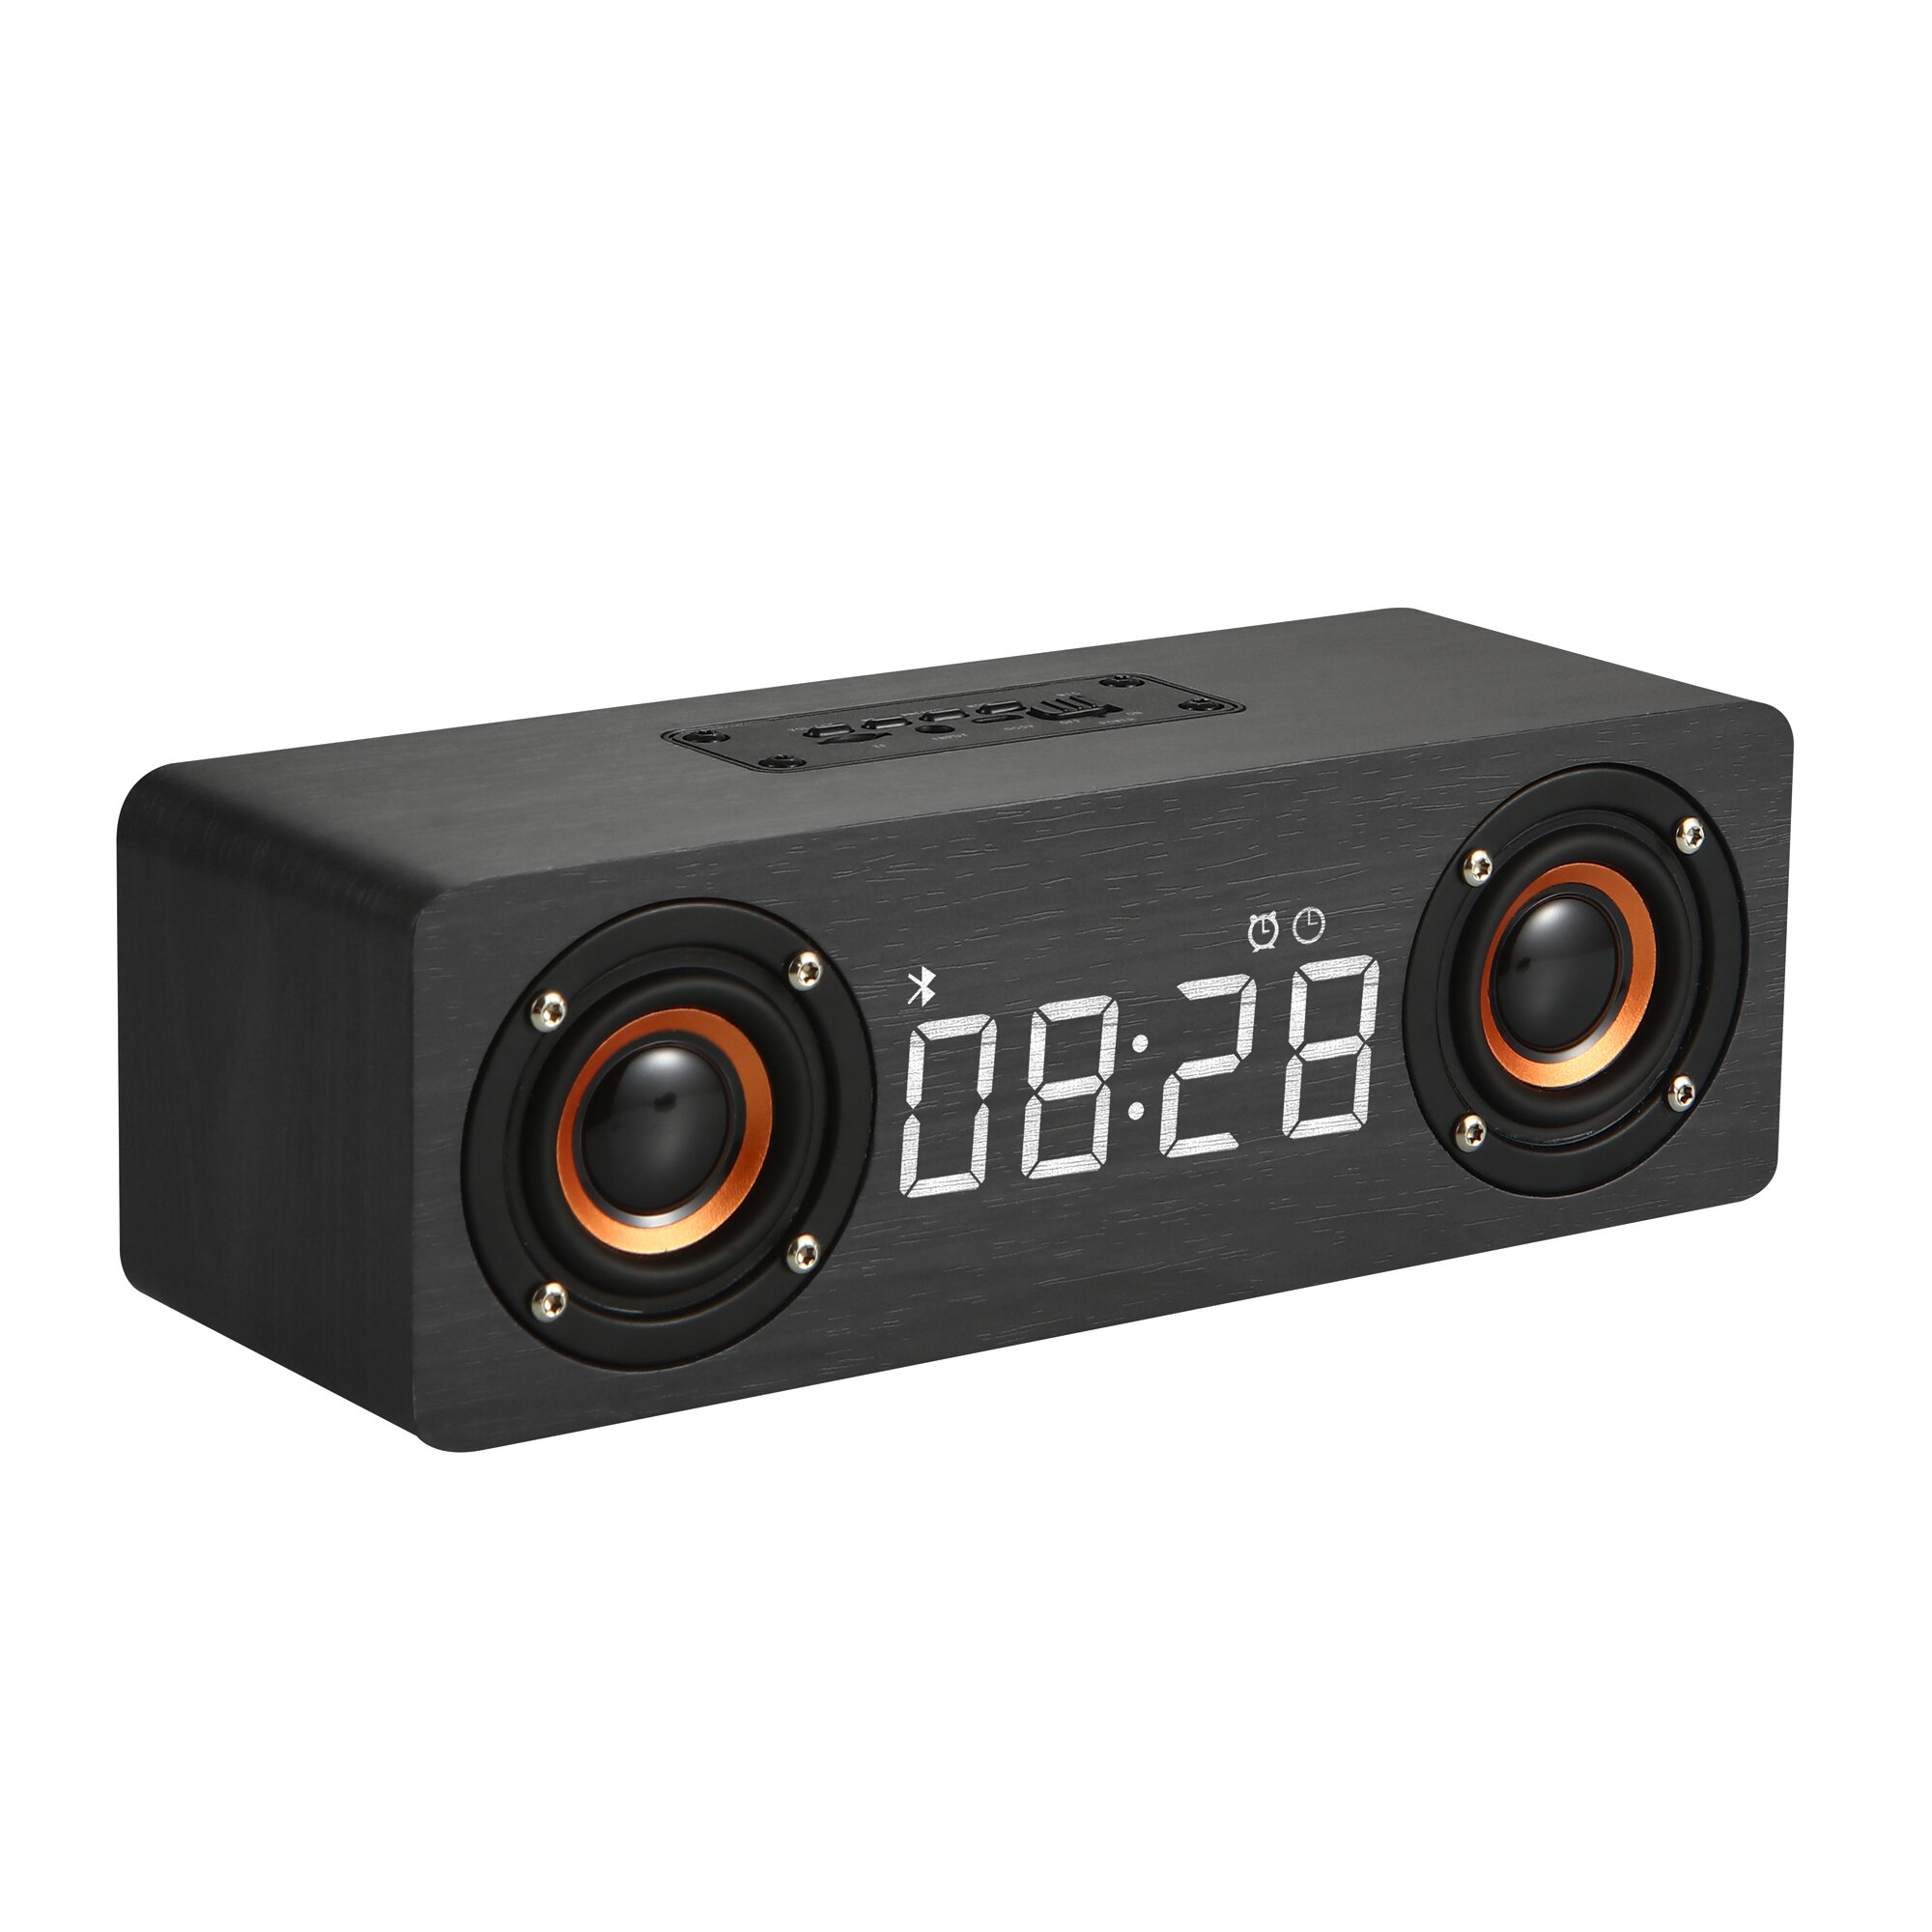 Bakeey M5C bluetooth Speaker Alarm Clock LED Screen Display Voice Call Wooden Box High Quality Music Stereo Sound Effect